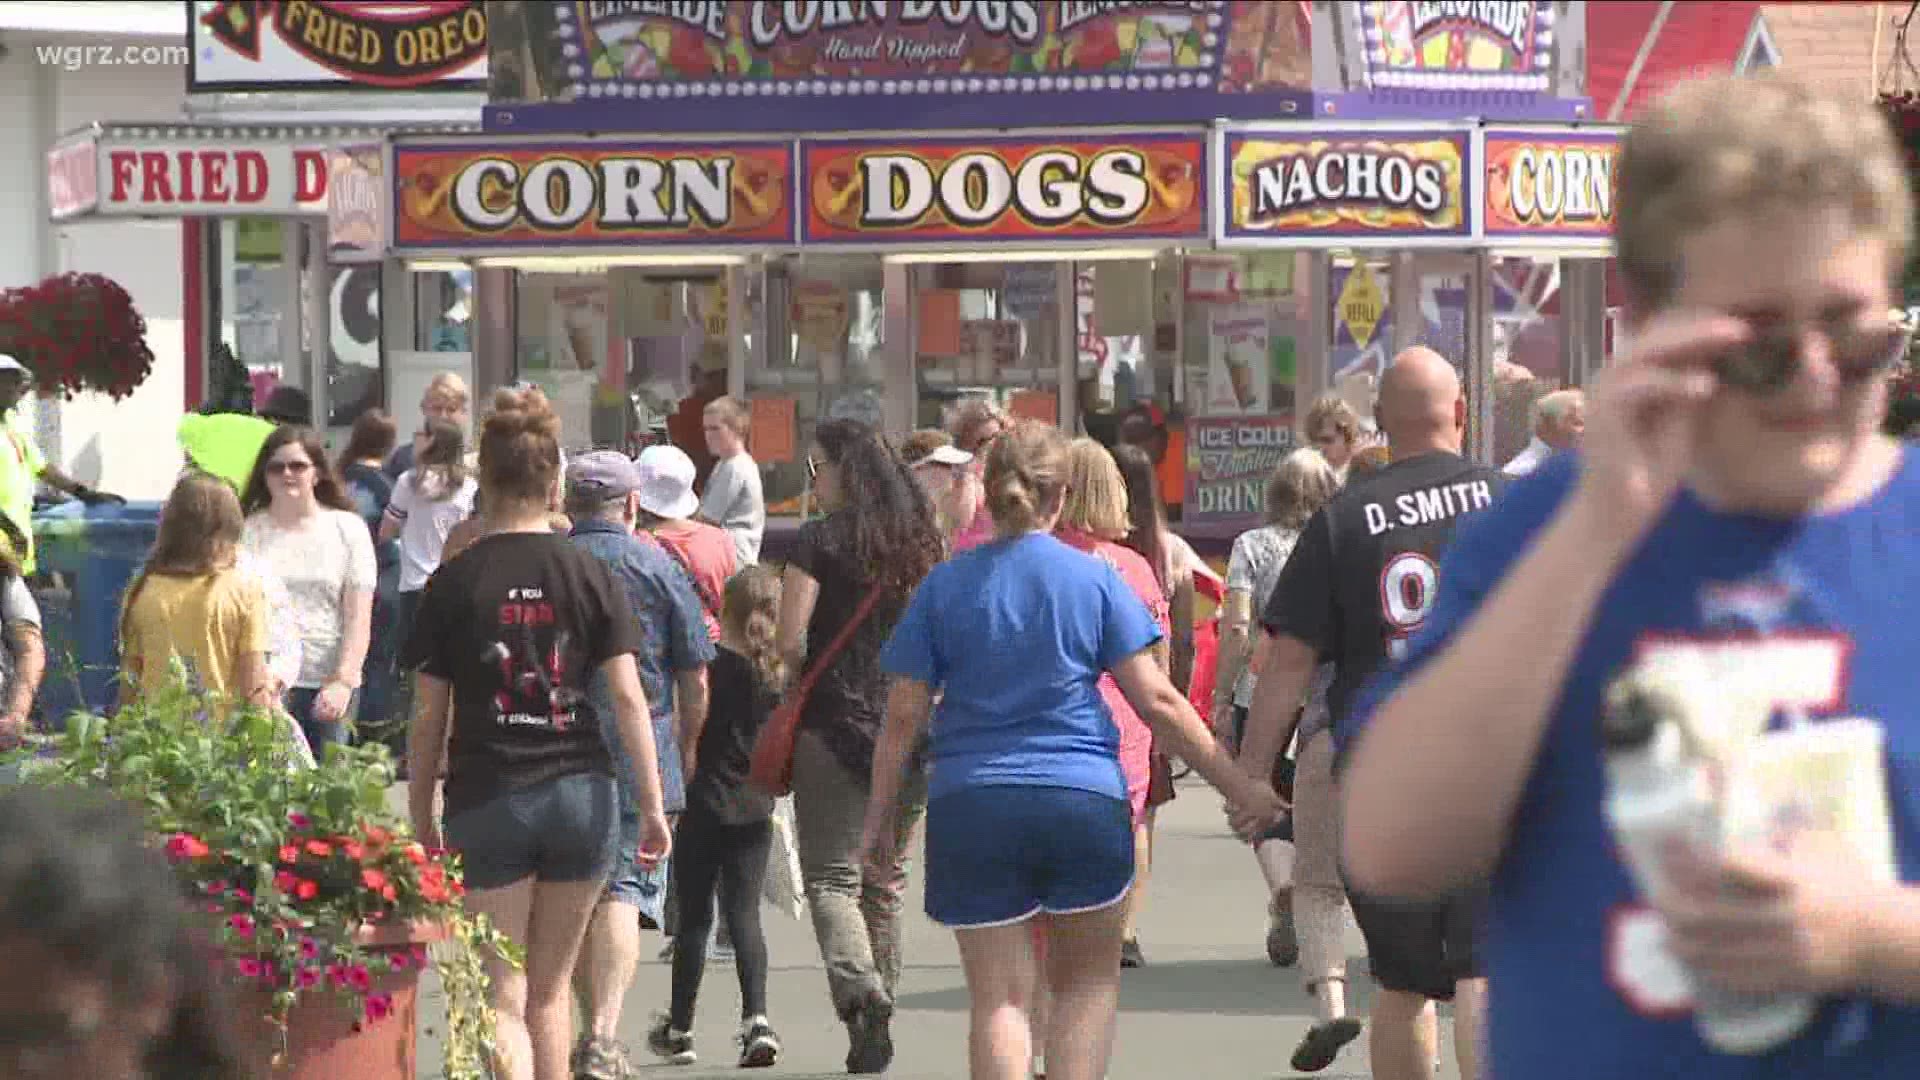 The Great Pumpkin Farm in Clarence is hosting a Fair Food Festival this weekend.